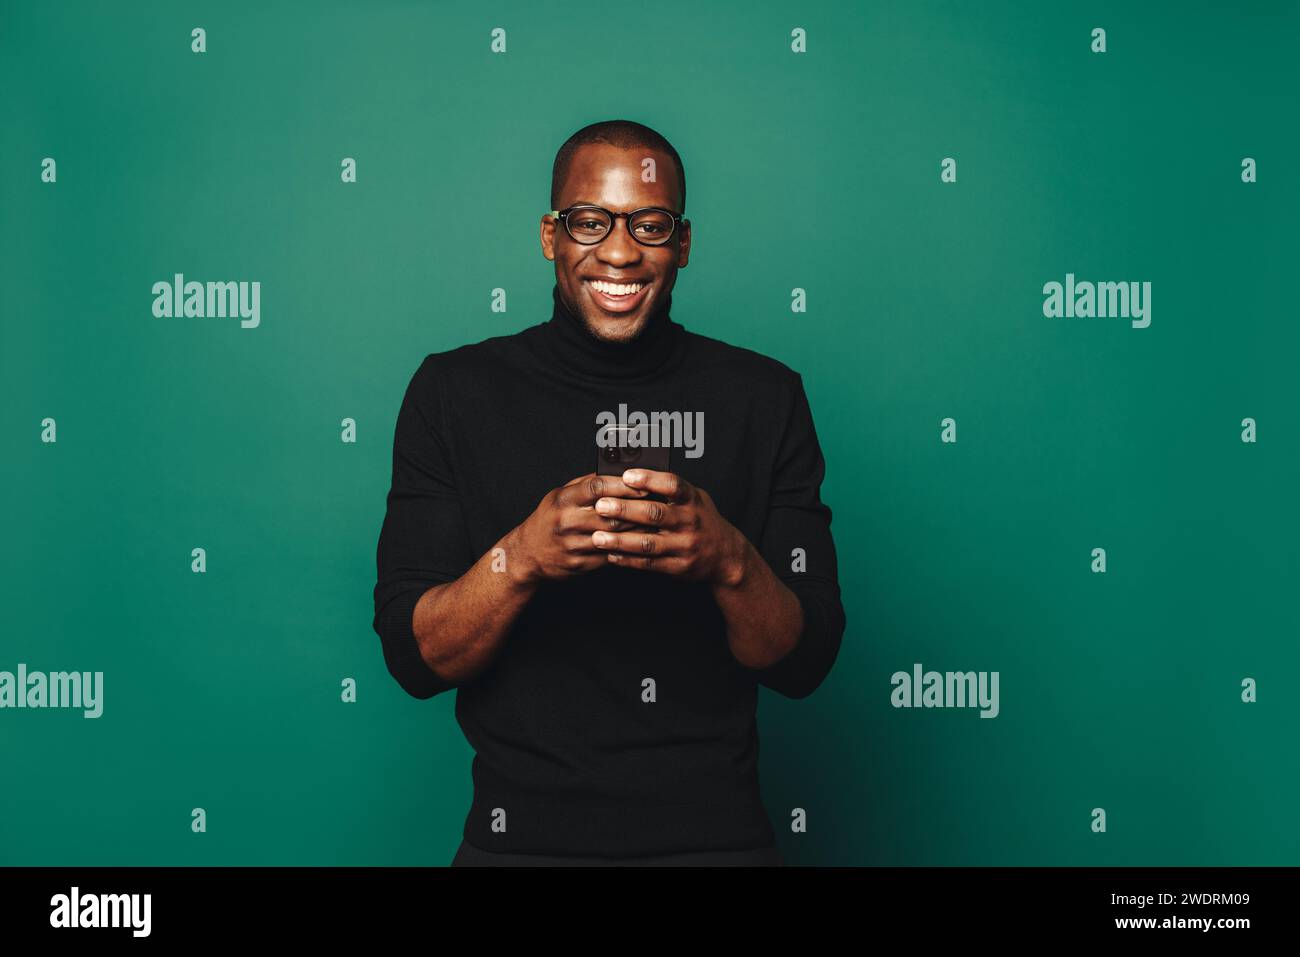 Portrait of a smiling young man in casual clothing standing against a green background, holding a smartphone. He stays connected and social with this Stock Photo